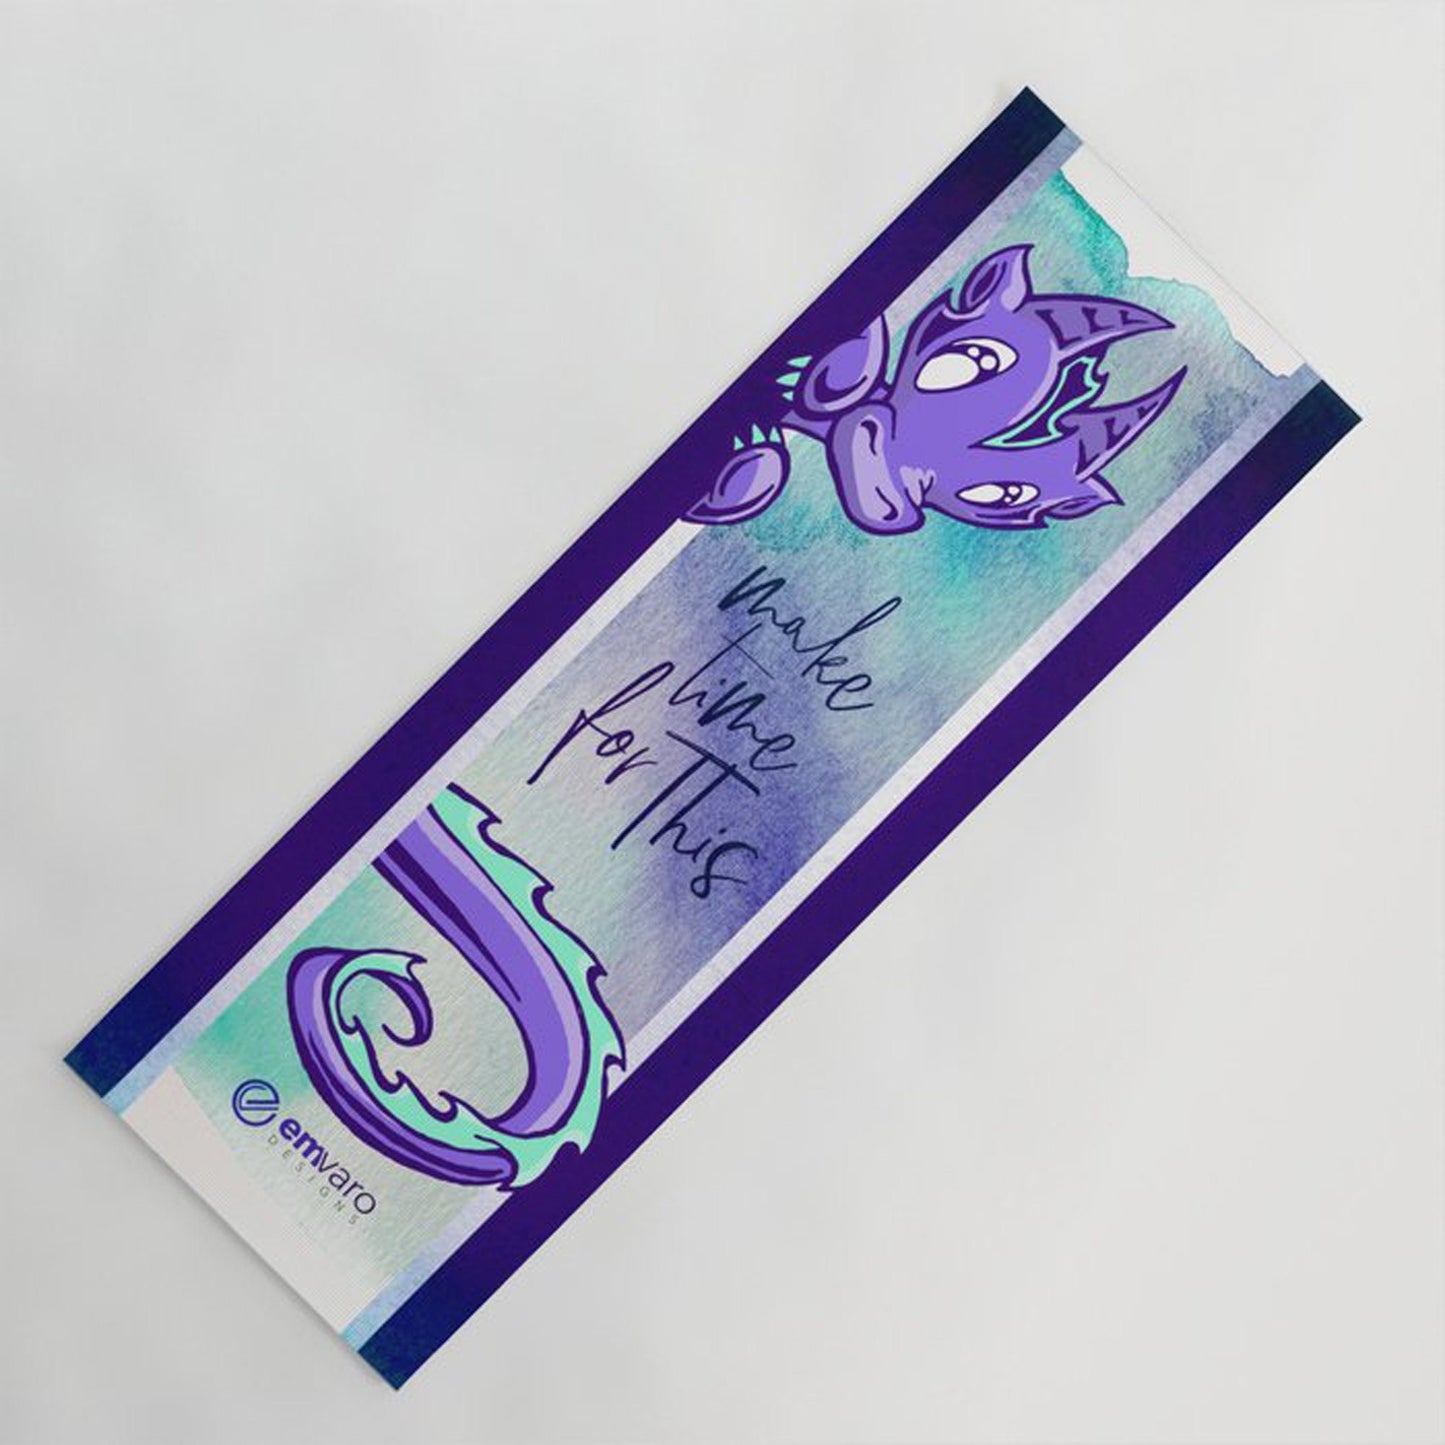 Yoga Mat: Make Time for This - Wisp the Dragon (3 colors)